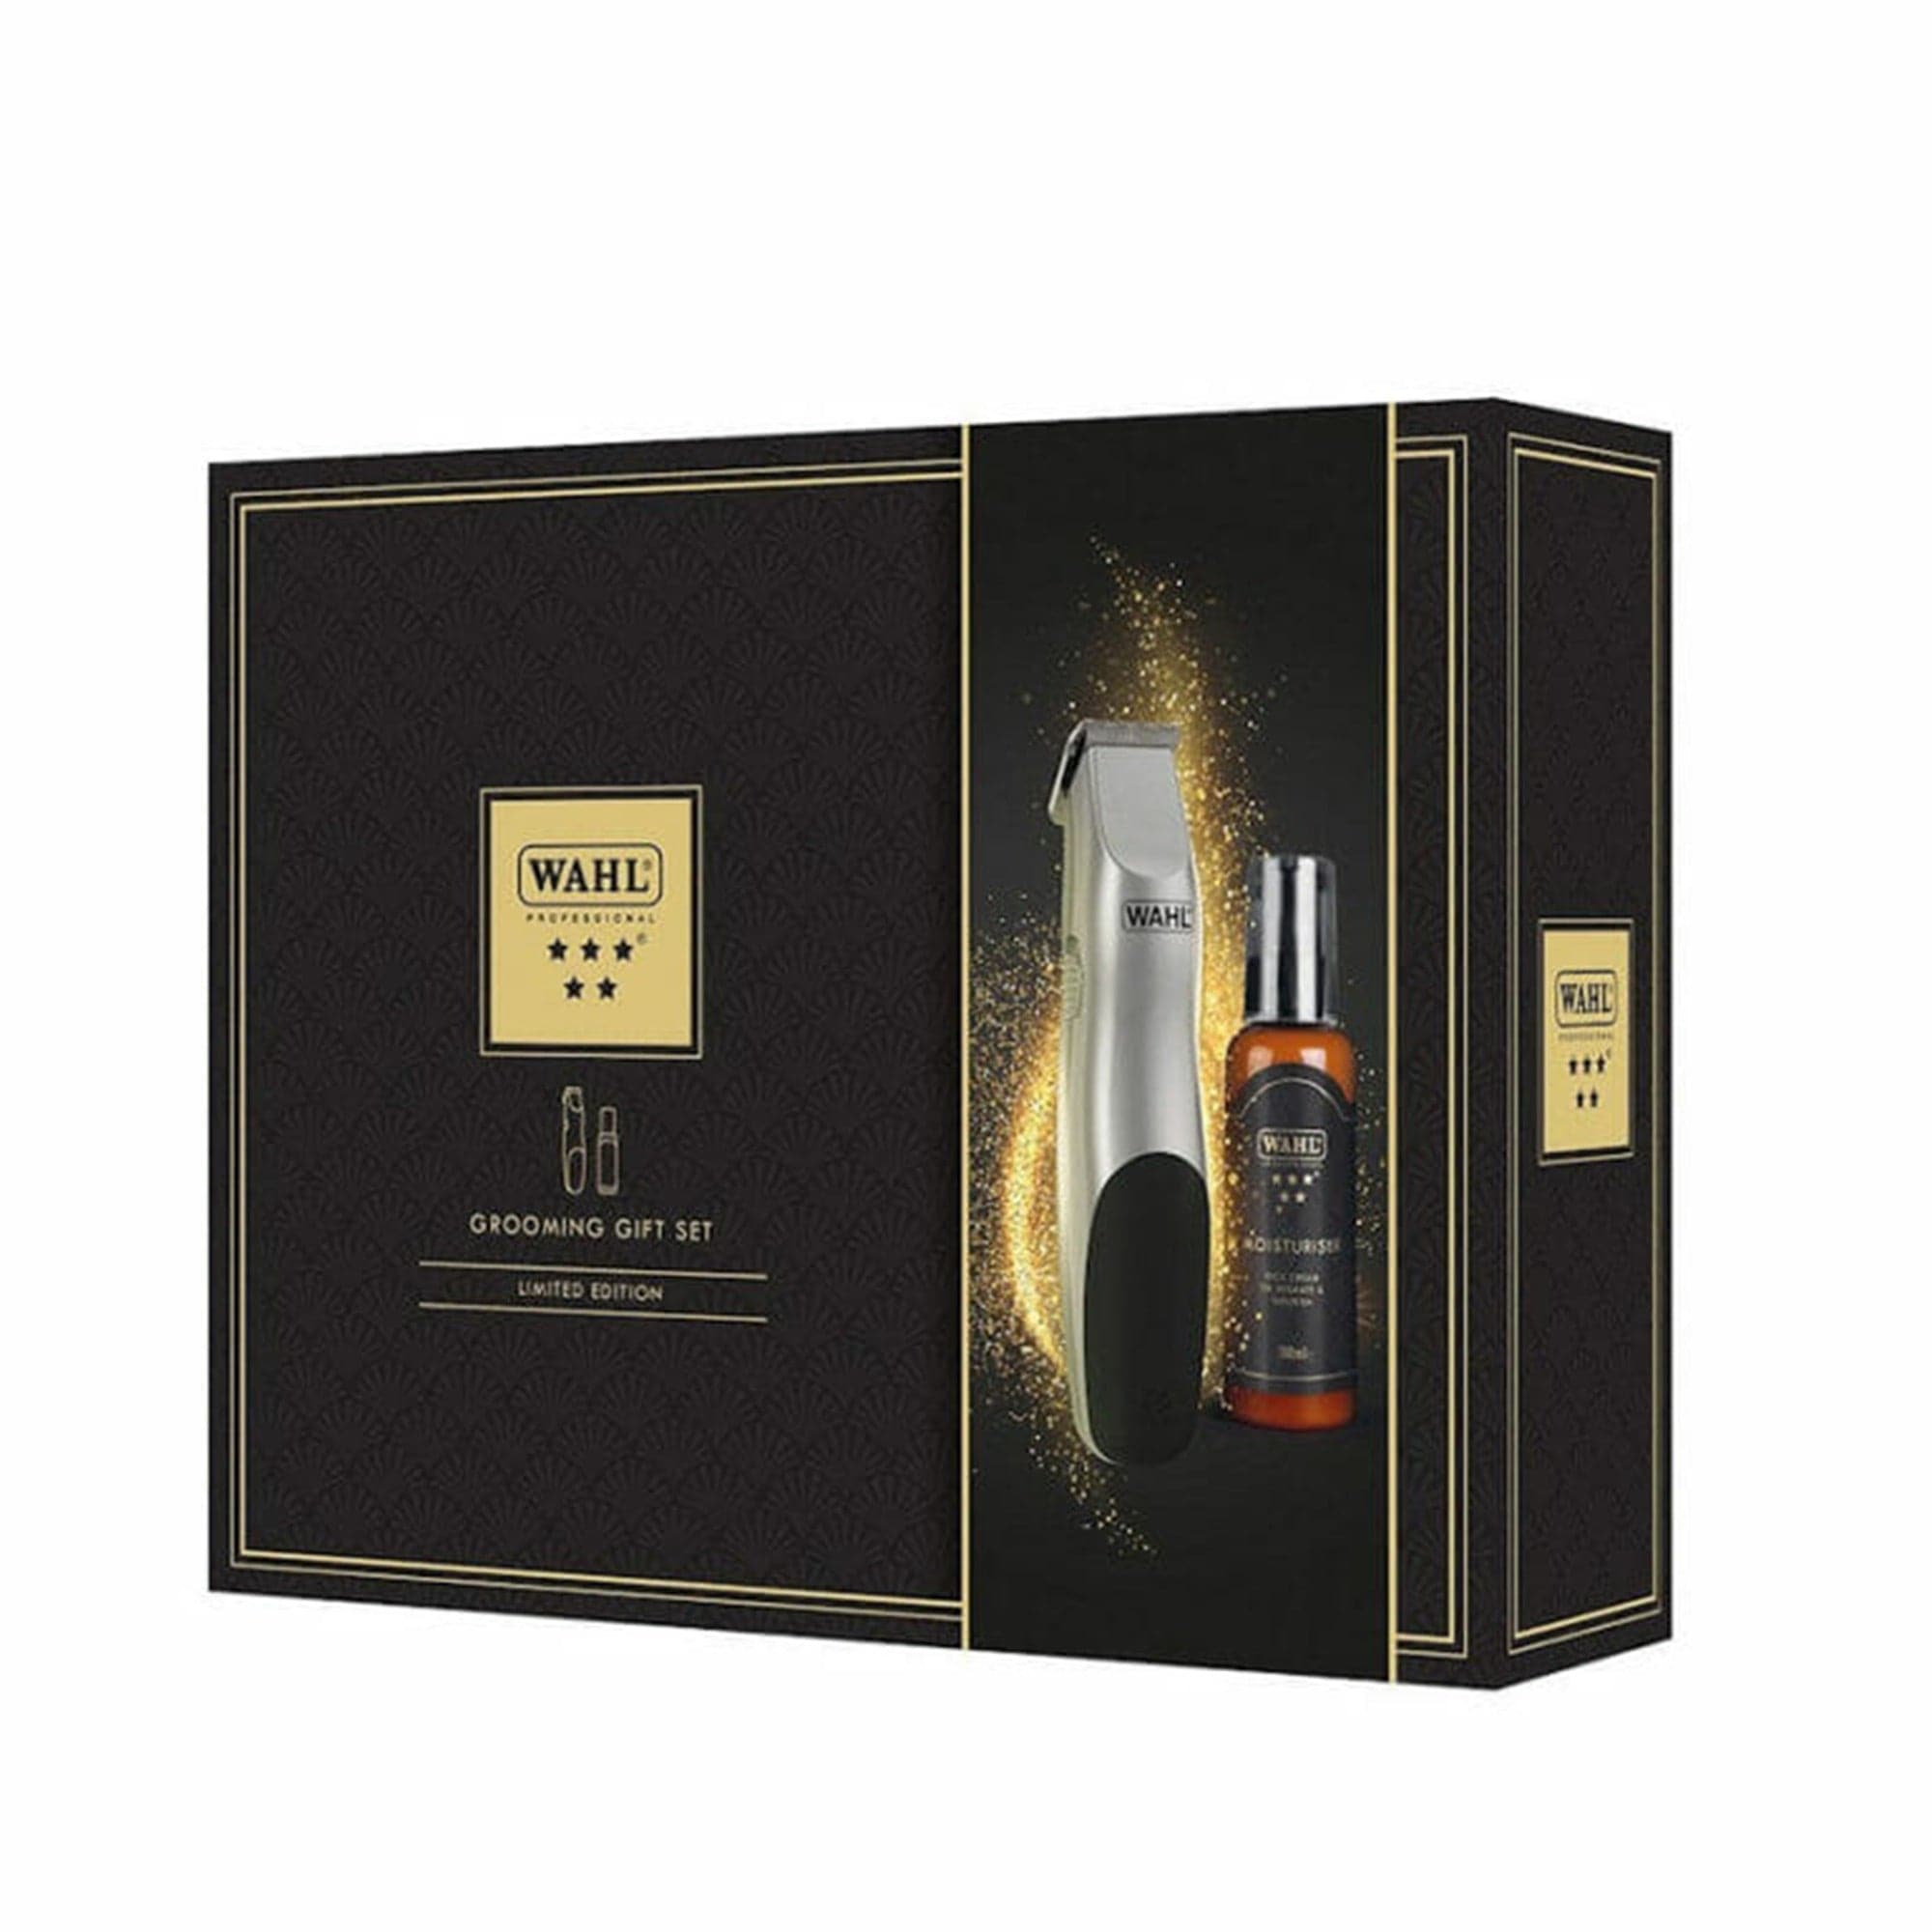 Wahl - 5 Star Grooming Gift Set Limited Edition